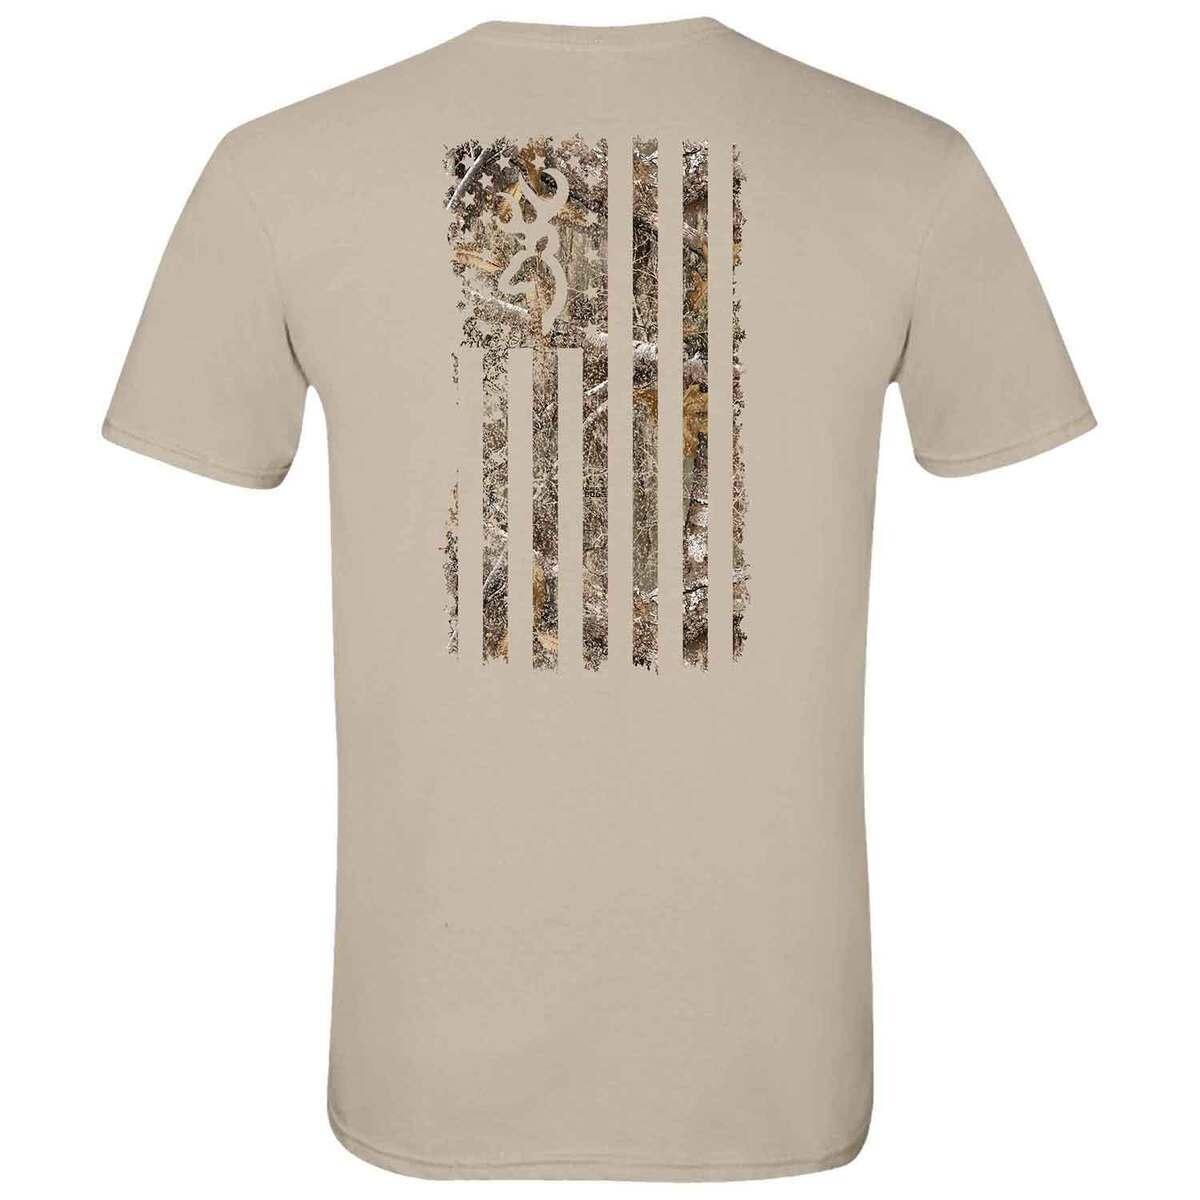 Browning Men's Realtree Edge Flag Short-Sleeve Casual Shirt - Sand M by Sportsman's Warehouse